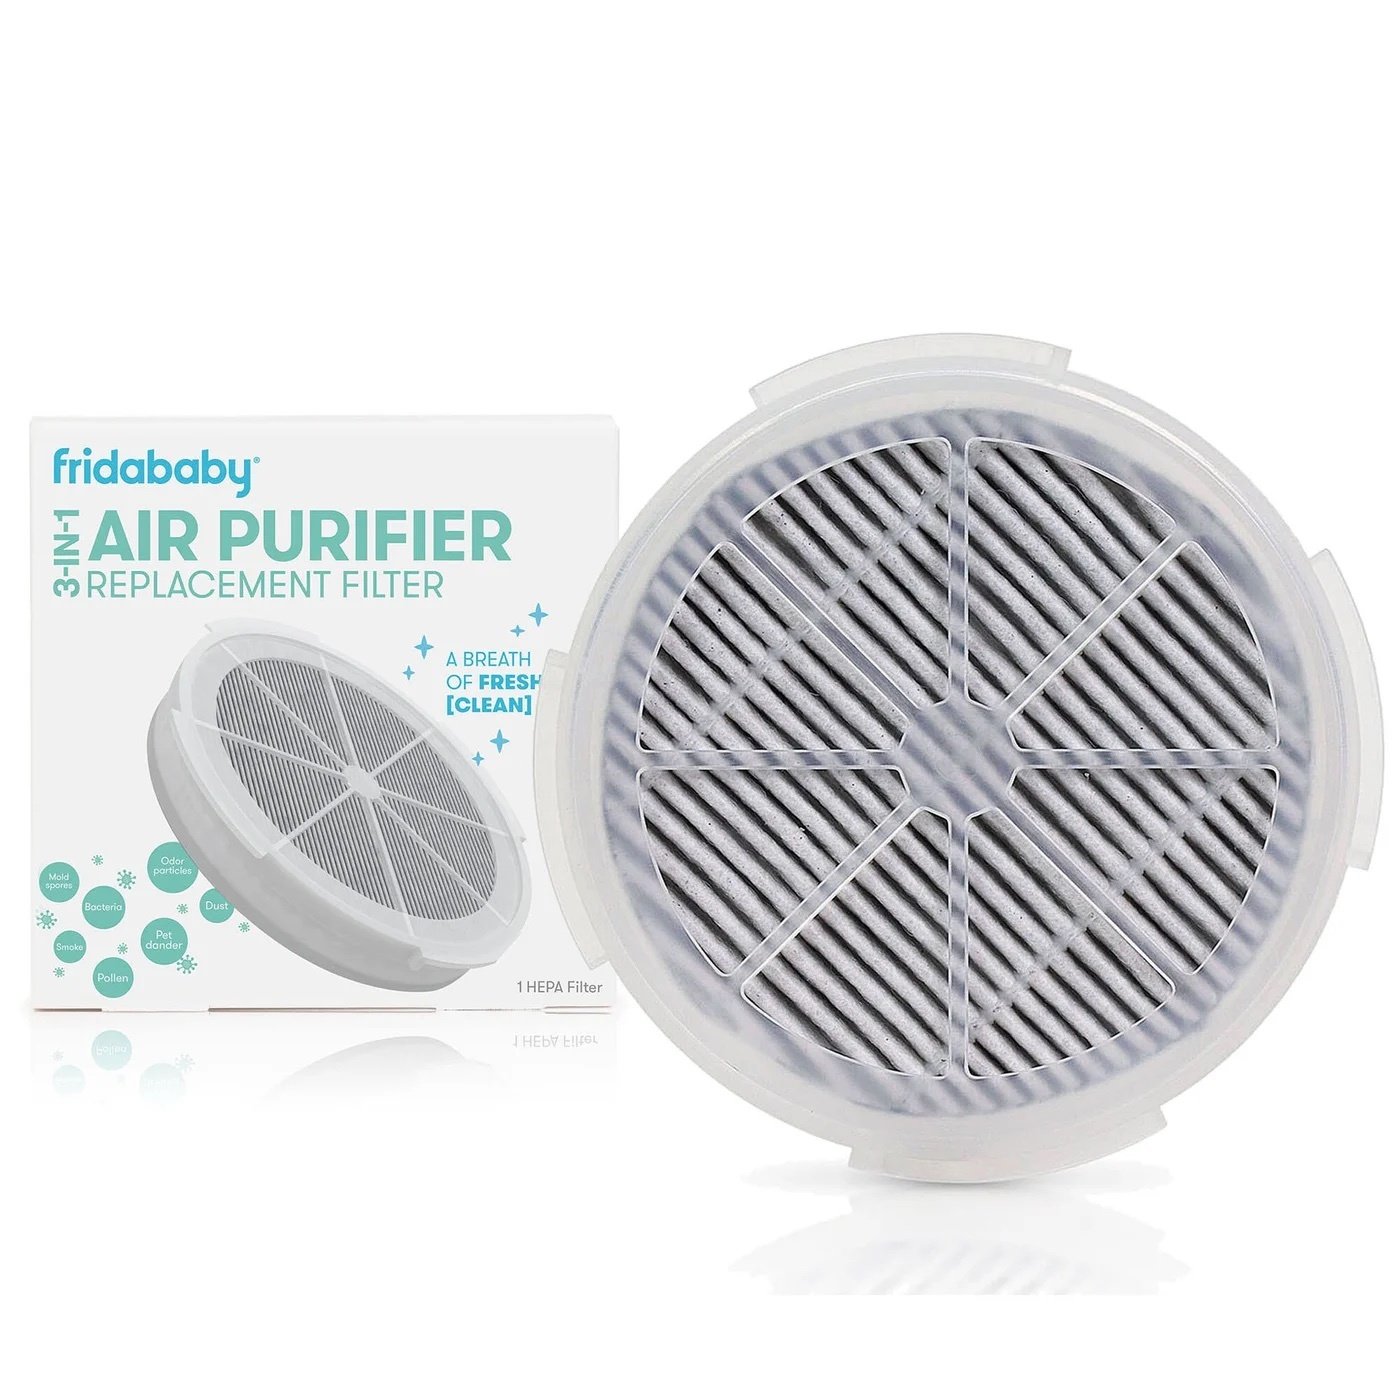 Fridababy Air Purifier Replacement Filter